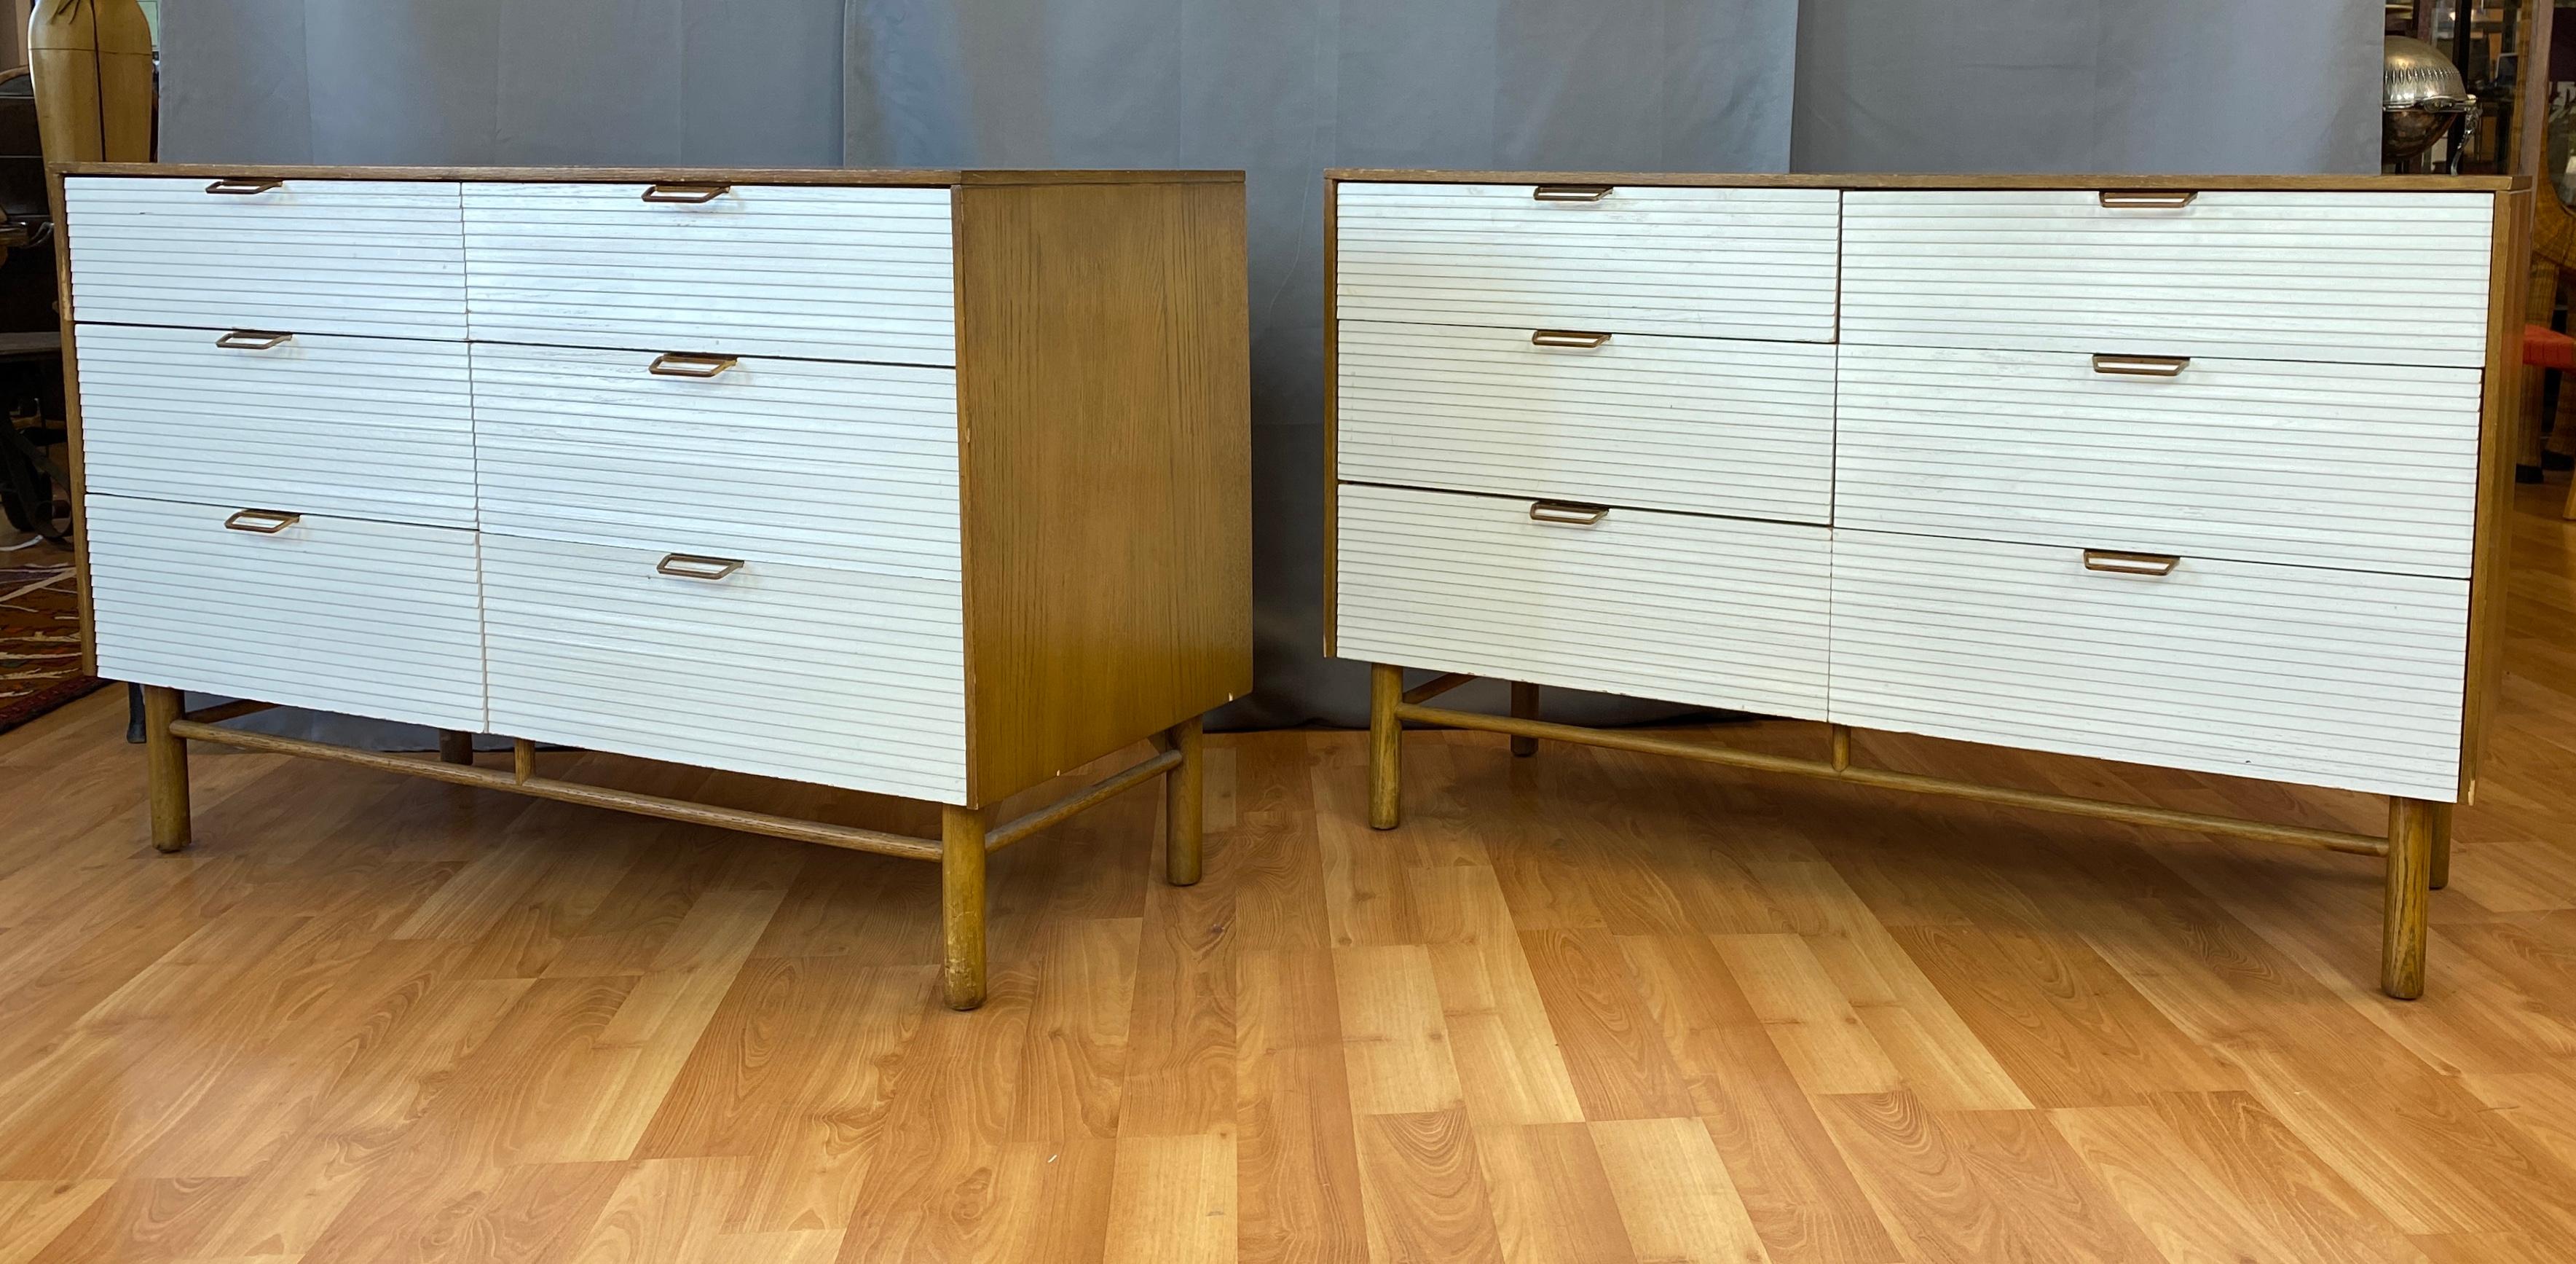 Raymond Loewy designed six drawer dresser for Mengel Furniture. We had two available in this listing, now just one.

Two tone bodies are light Brown painted oak with White louvered drawer fronts, handles are stamped steel with Brass coloring. 
Both